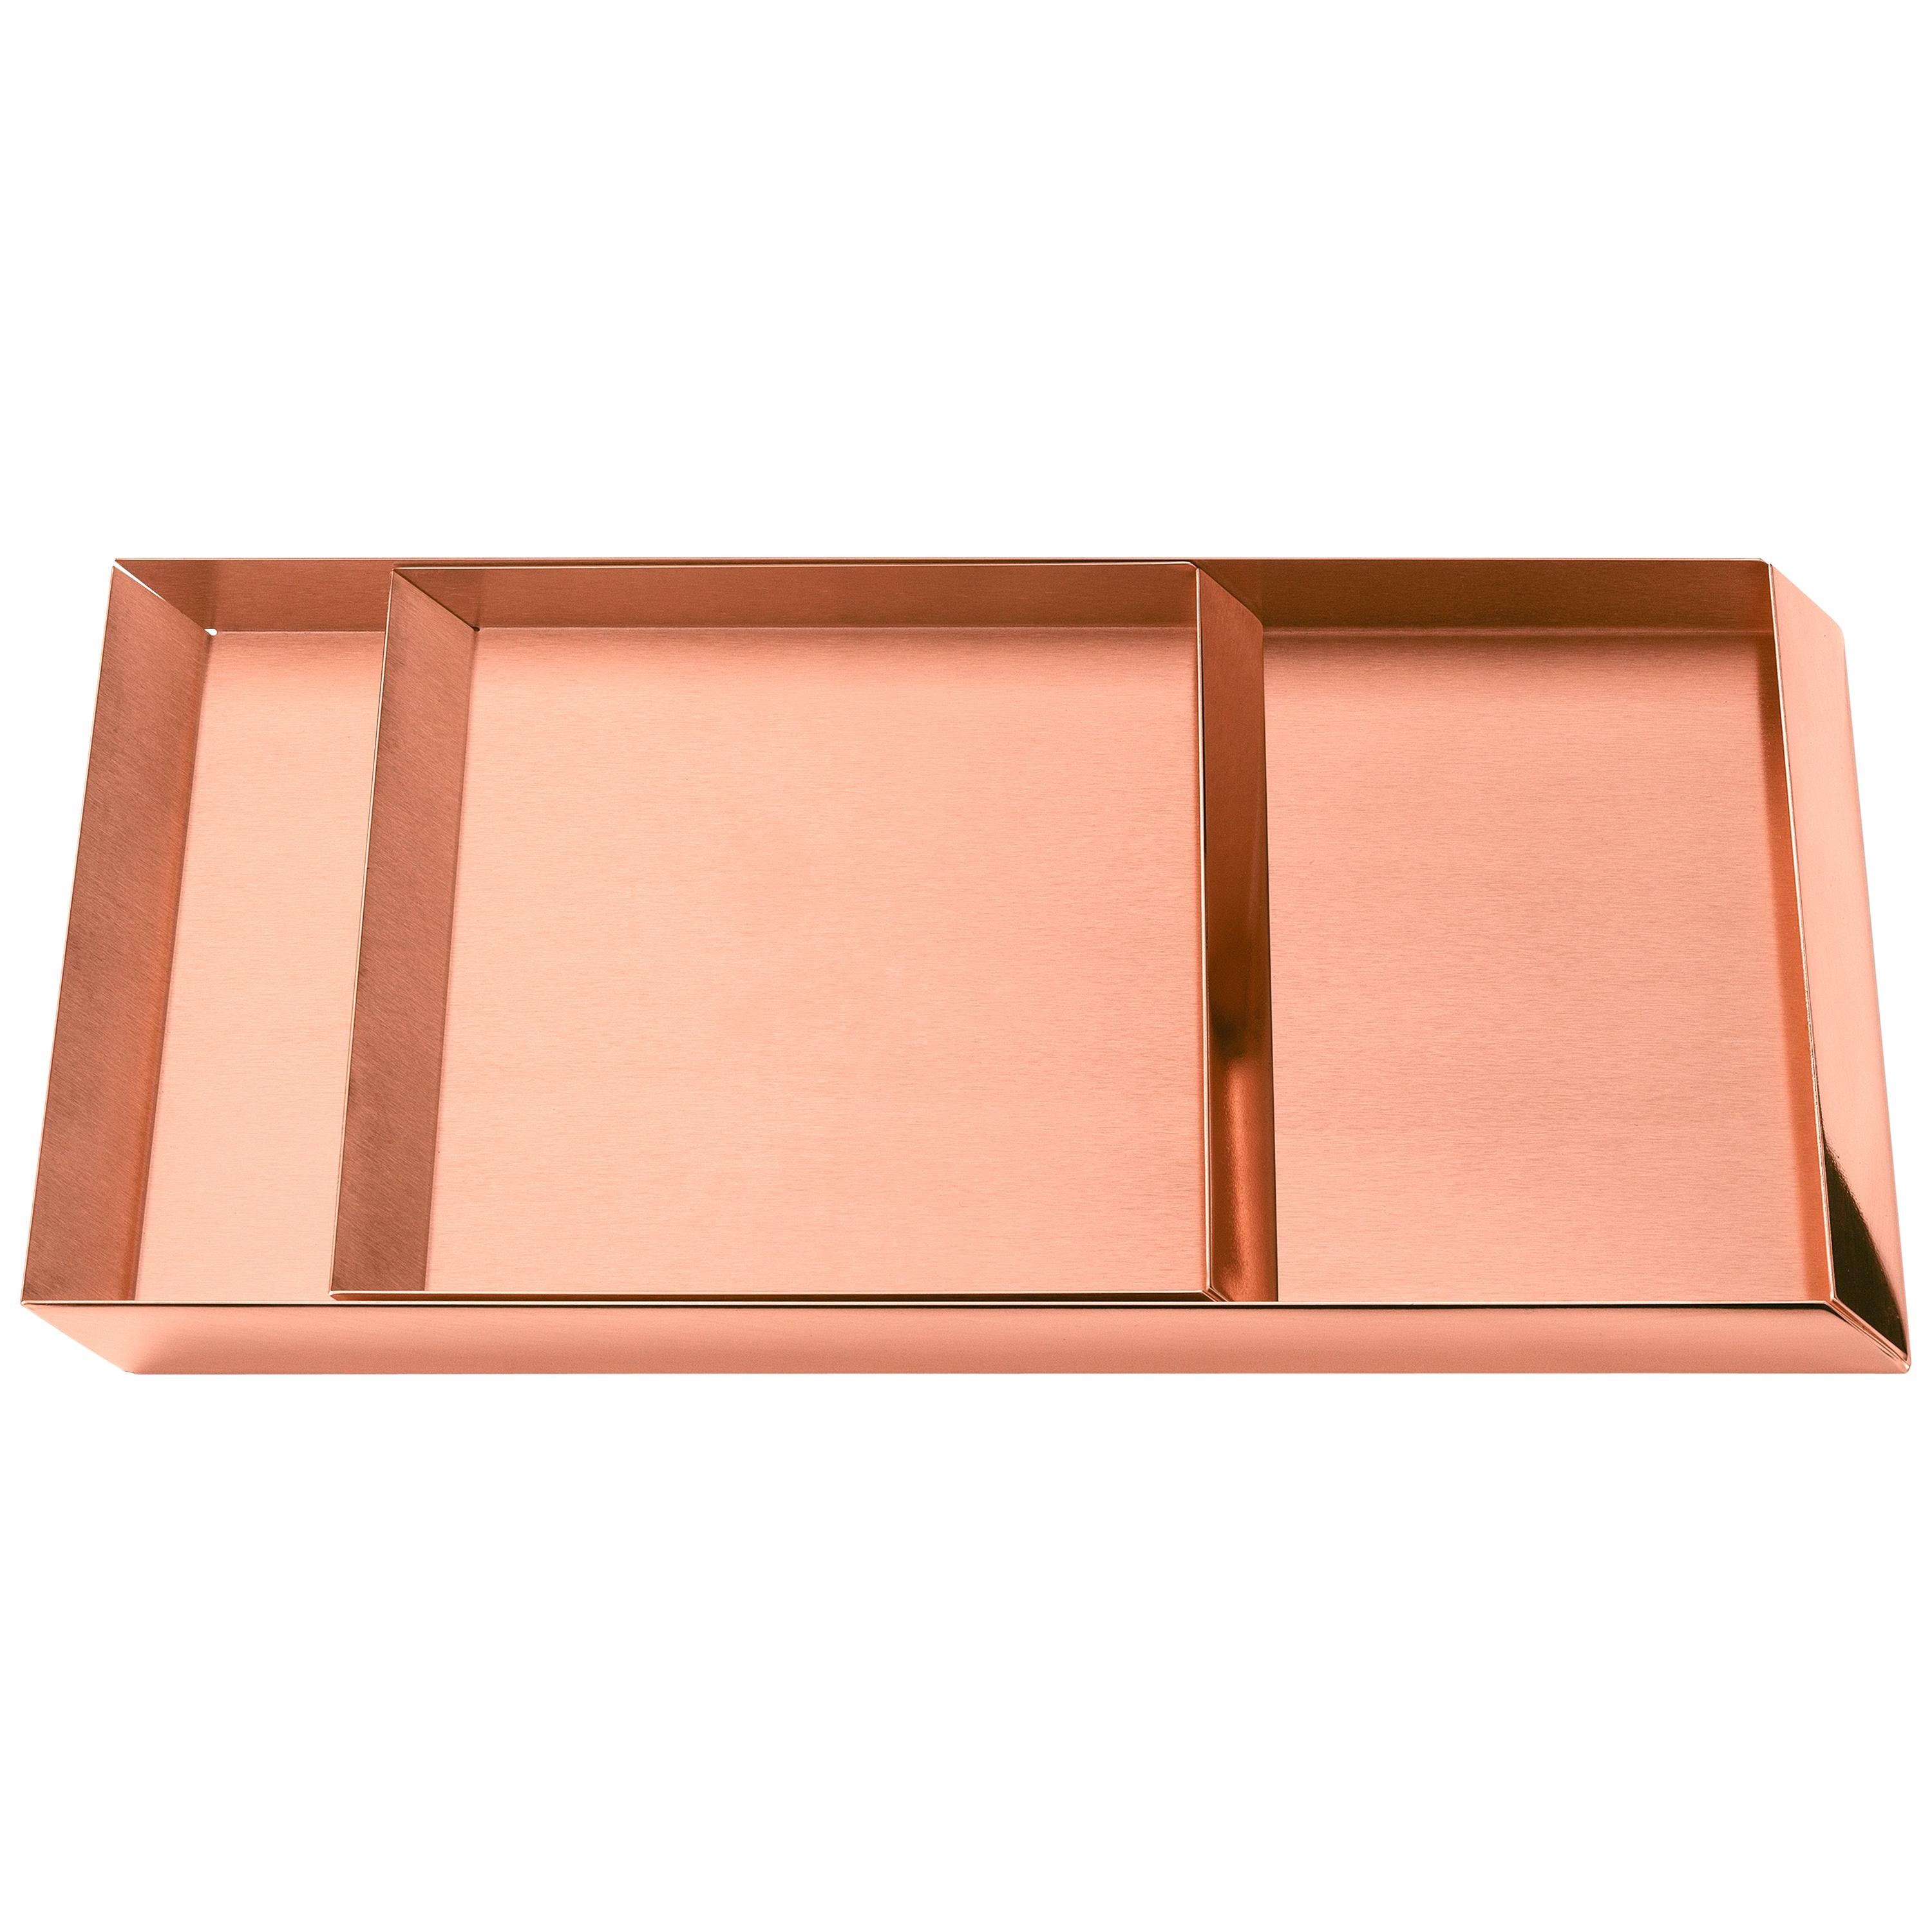 Set of 2 Ghidini 1961 Axonometry Trays in Copper by Elisa Giovanni For Sale